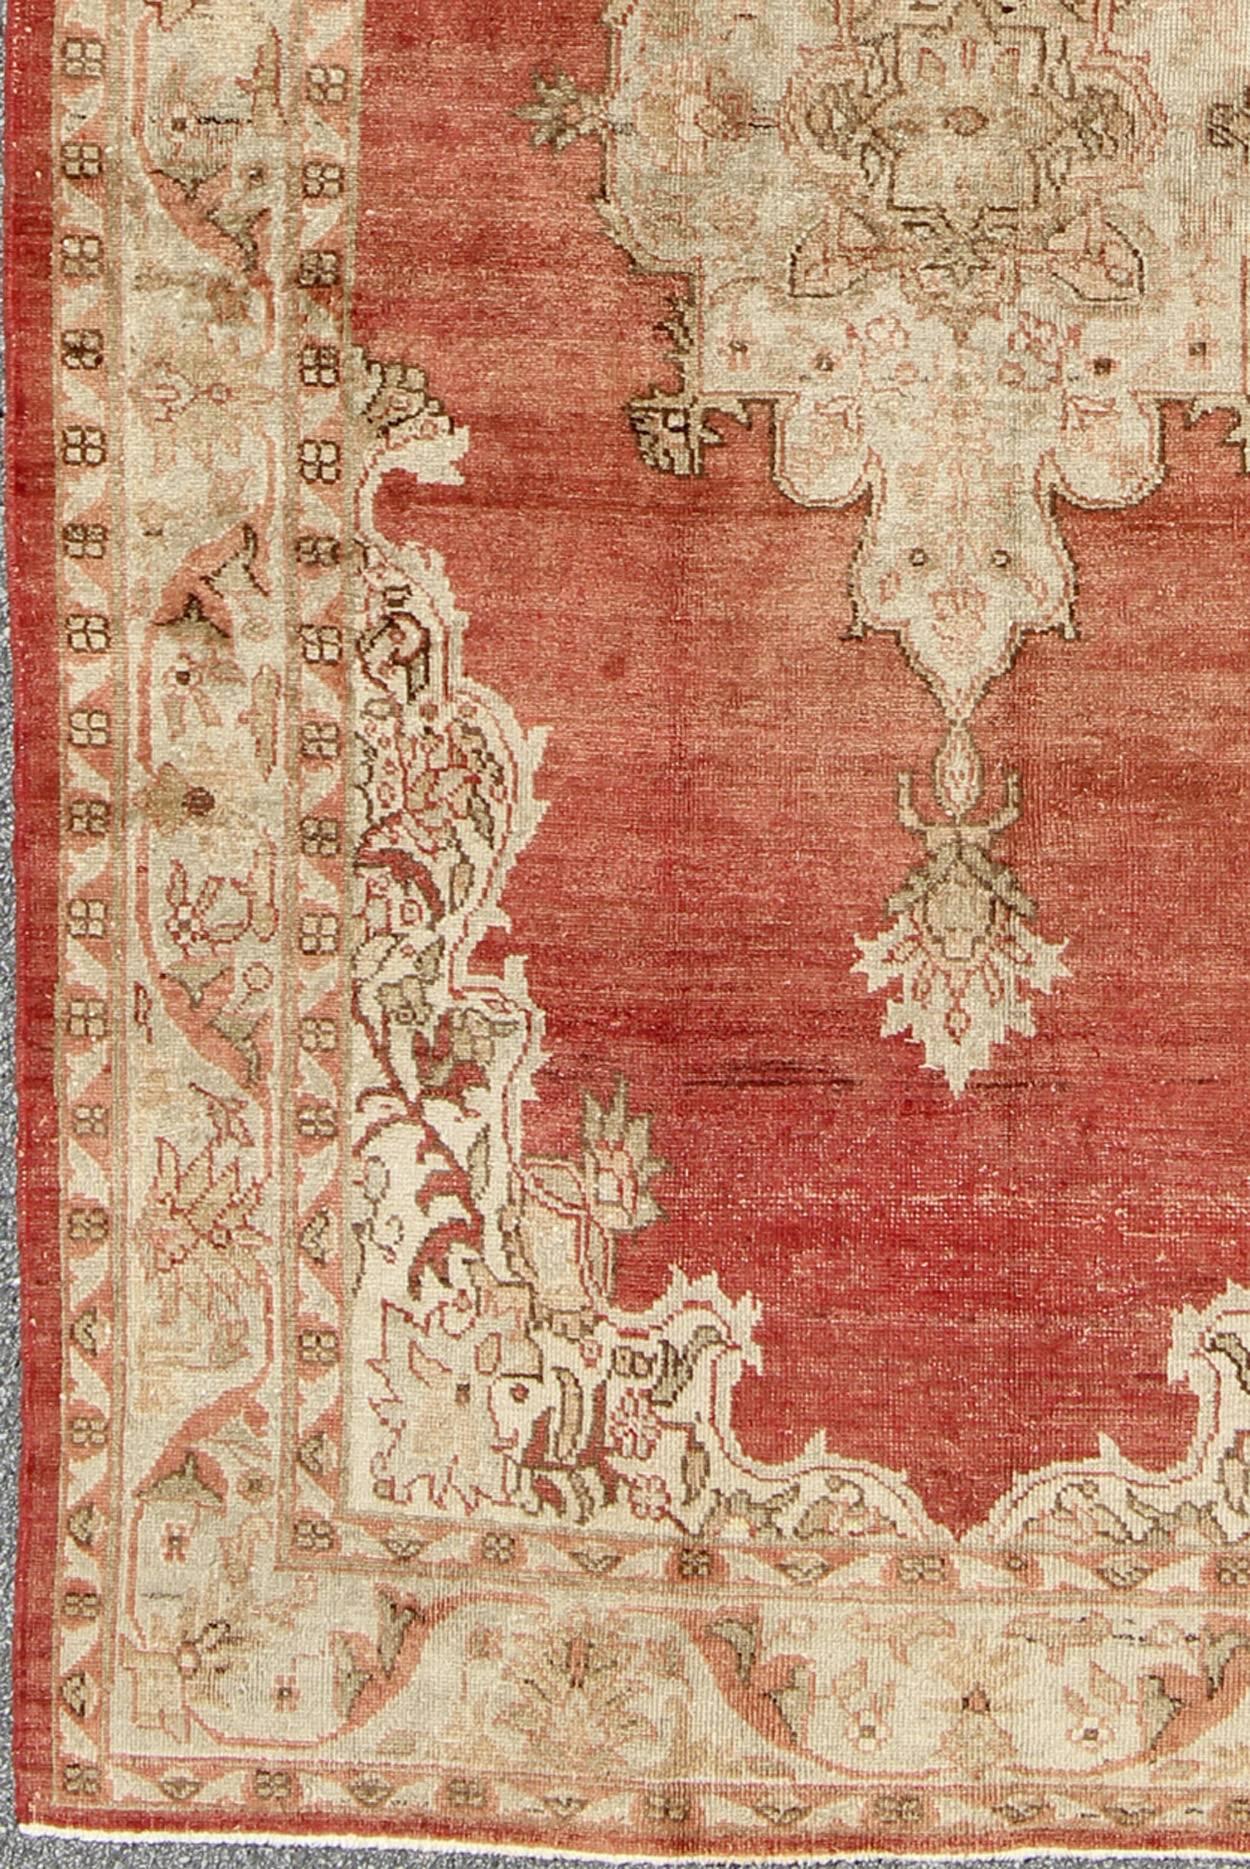 Antique Turkish medallion Oushak rug in soft red, taupe and light green. Rug/NA-41953, 1930's Oushak antique Turkish rug in soft red background, taupe & pale green.

This beautiful antique Turkish Oushak carpet bears a lovely stretched central